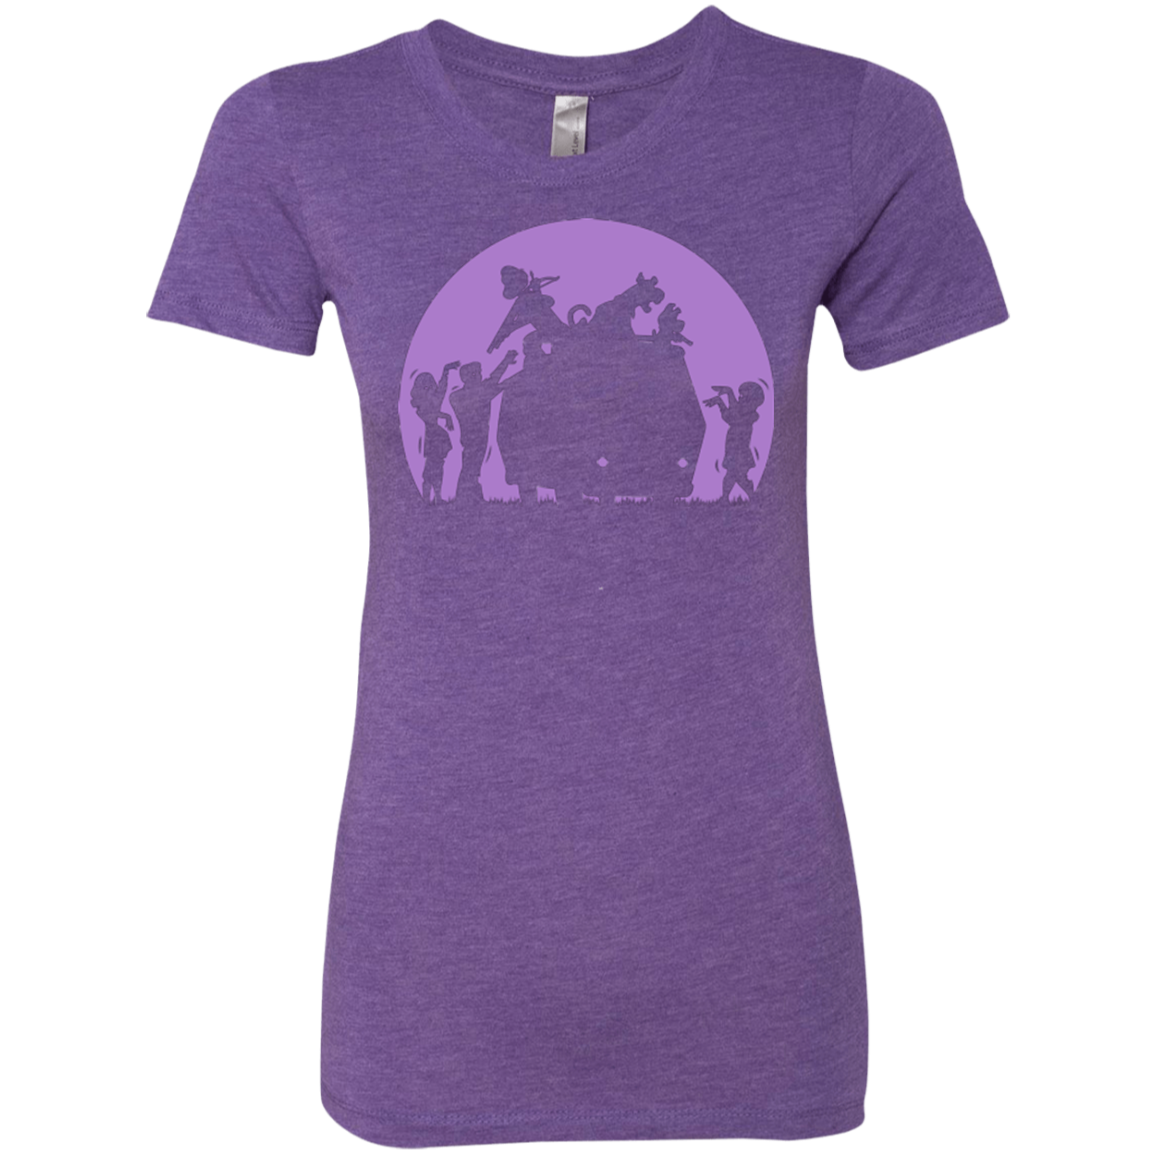 Zoinks They're Zombies Women's Triblend T-Shirt